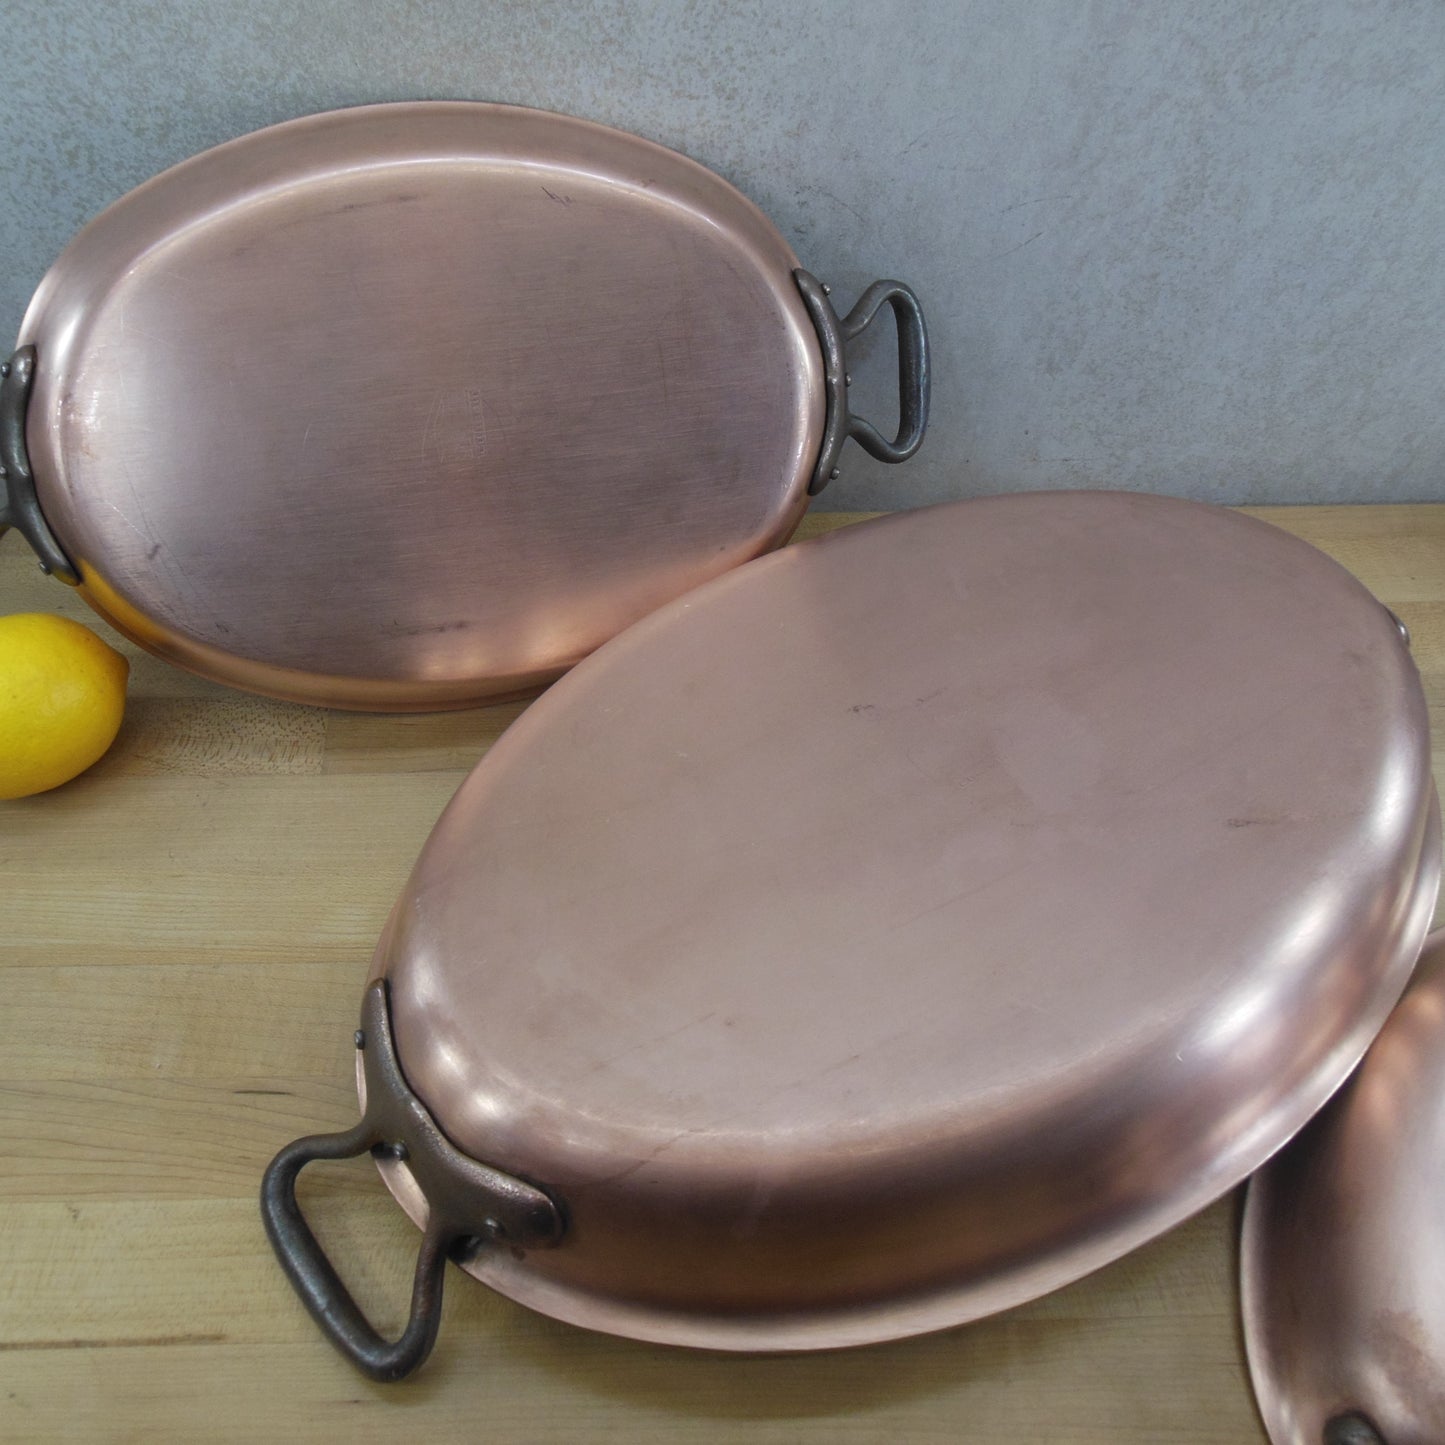 Falk Culinair Belgium Classic Copper Stainless Oval Au Gratin Pans 3 Set Cleaned